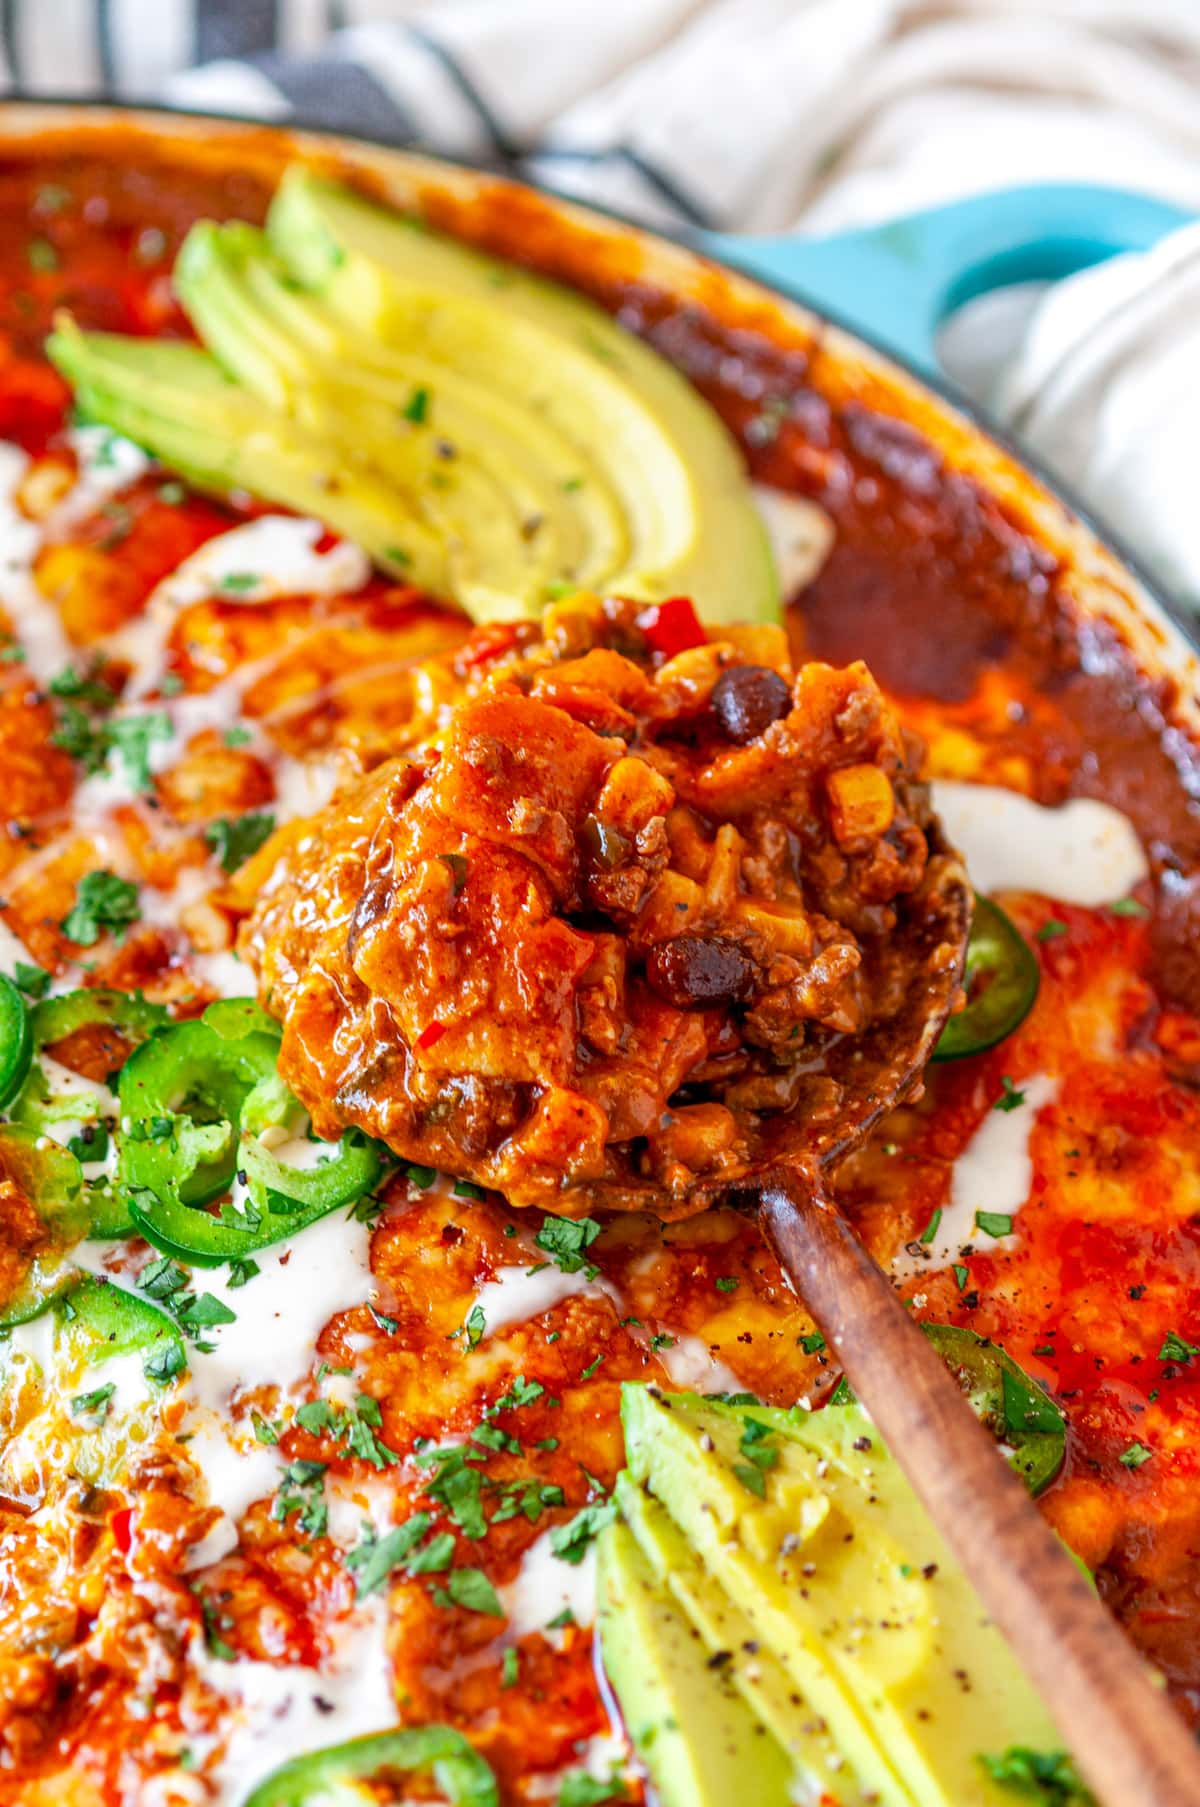 One Pot Red Enchilada Bake with scoop in wooden serving spoon topped with sliced avocado, jalapeno, cilantro, and crema Mexicana